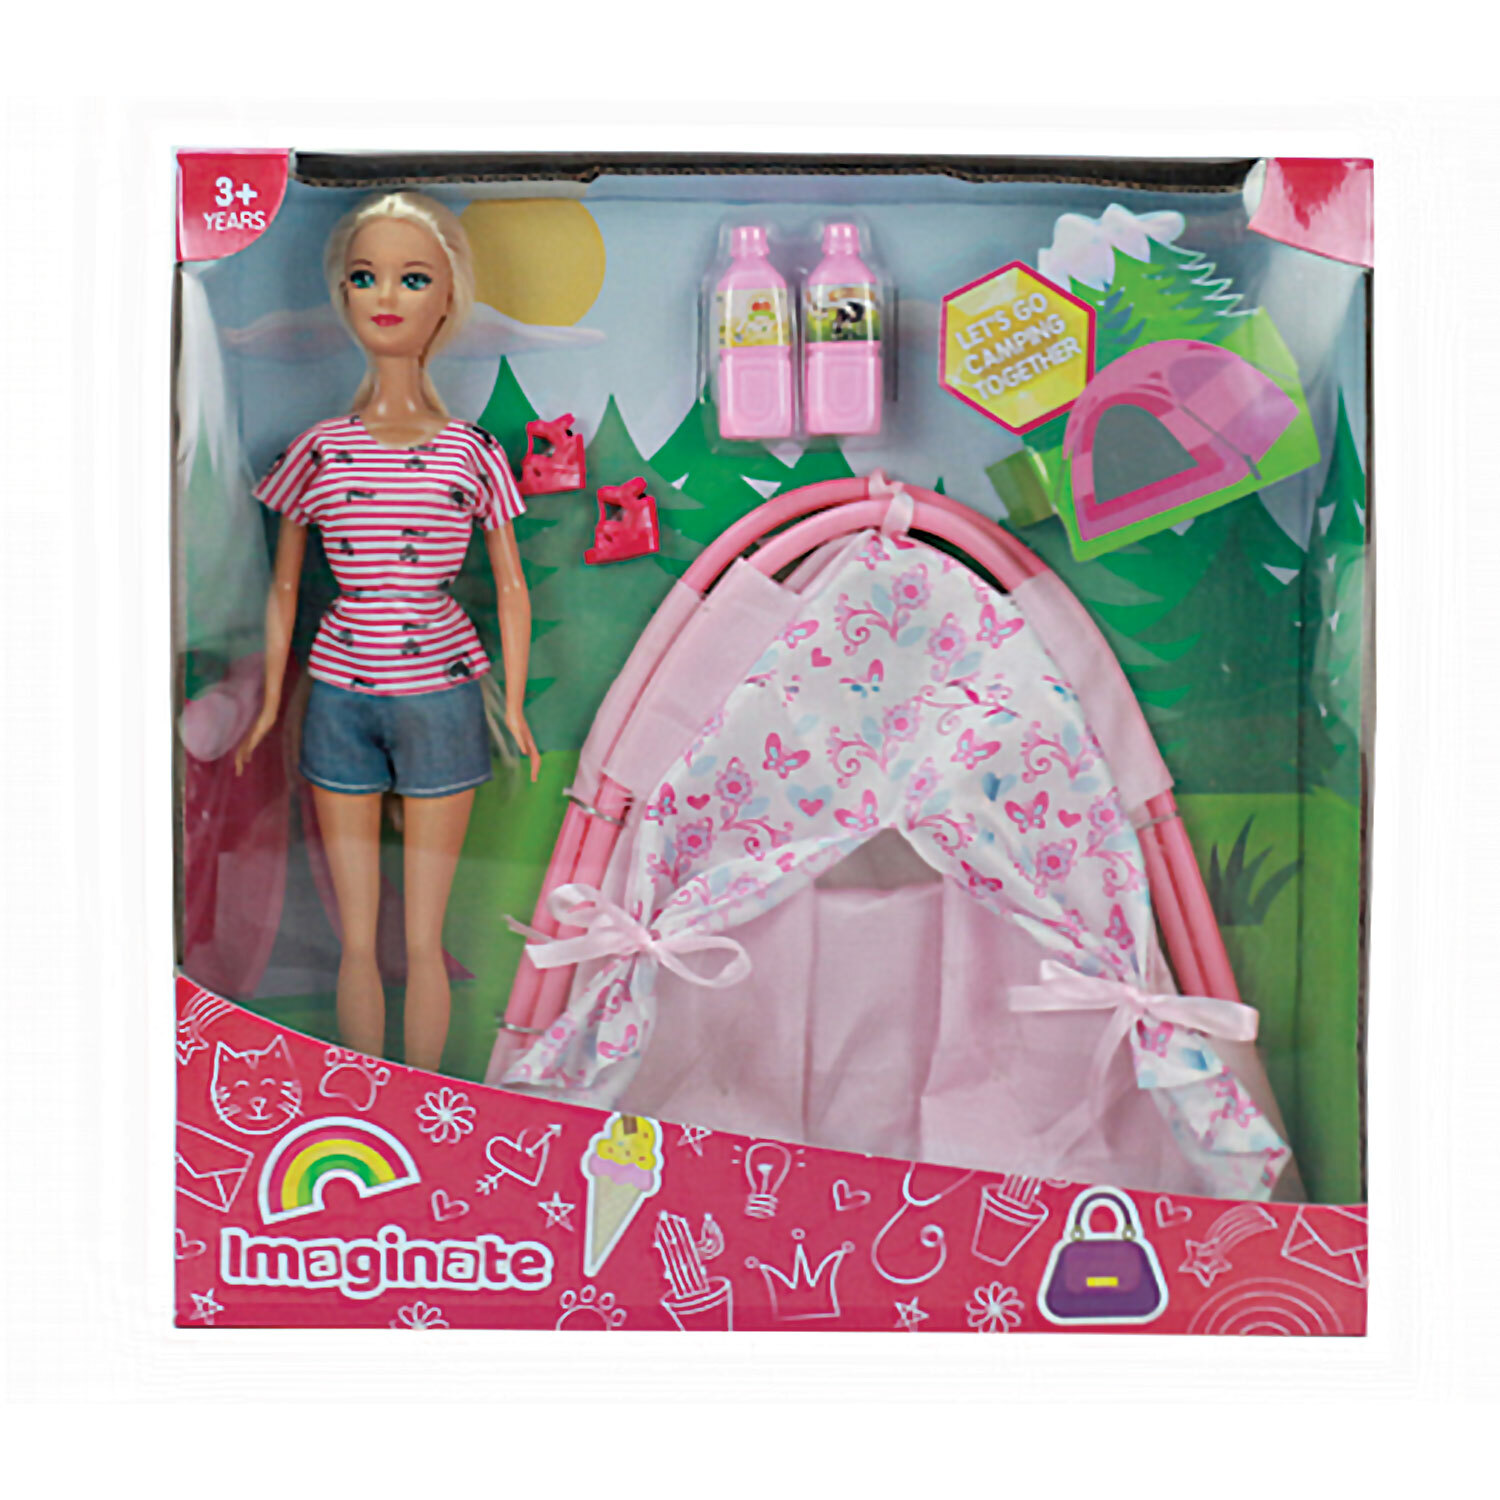 Imaginate Camping Doll with Accessories Image